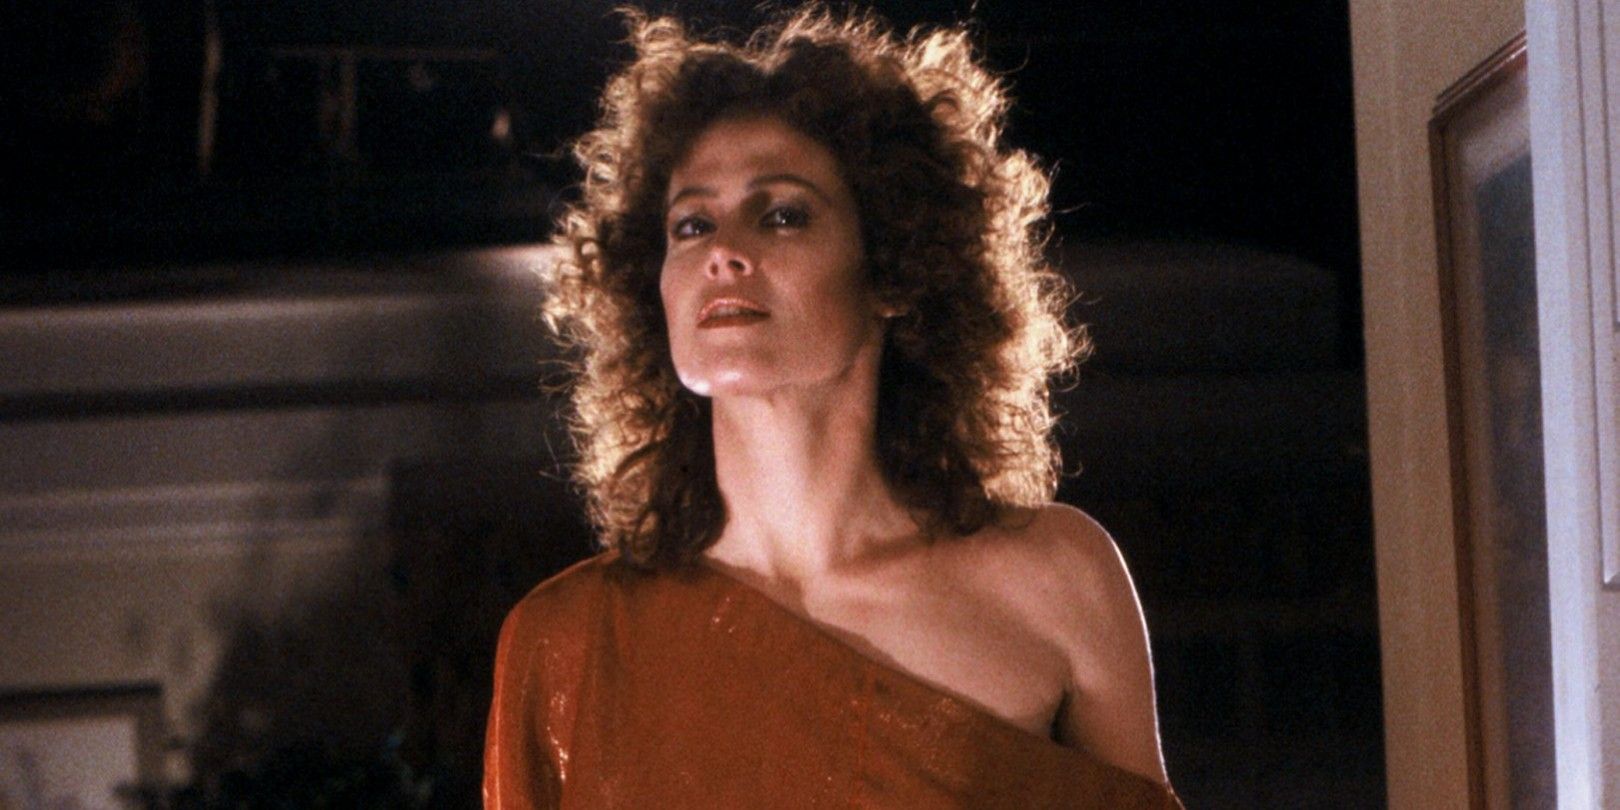 Sigourney Weaver in 1984 Ghostbusters